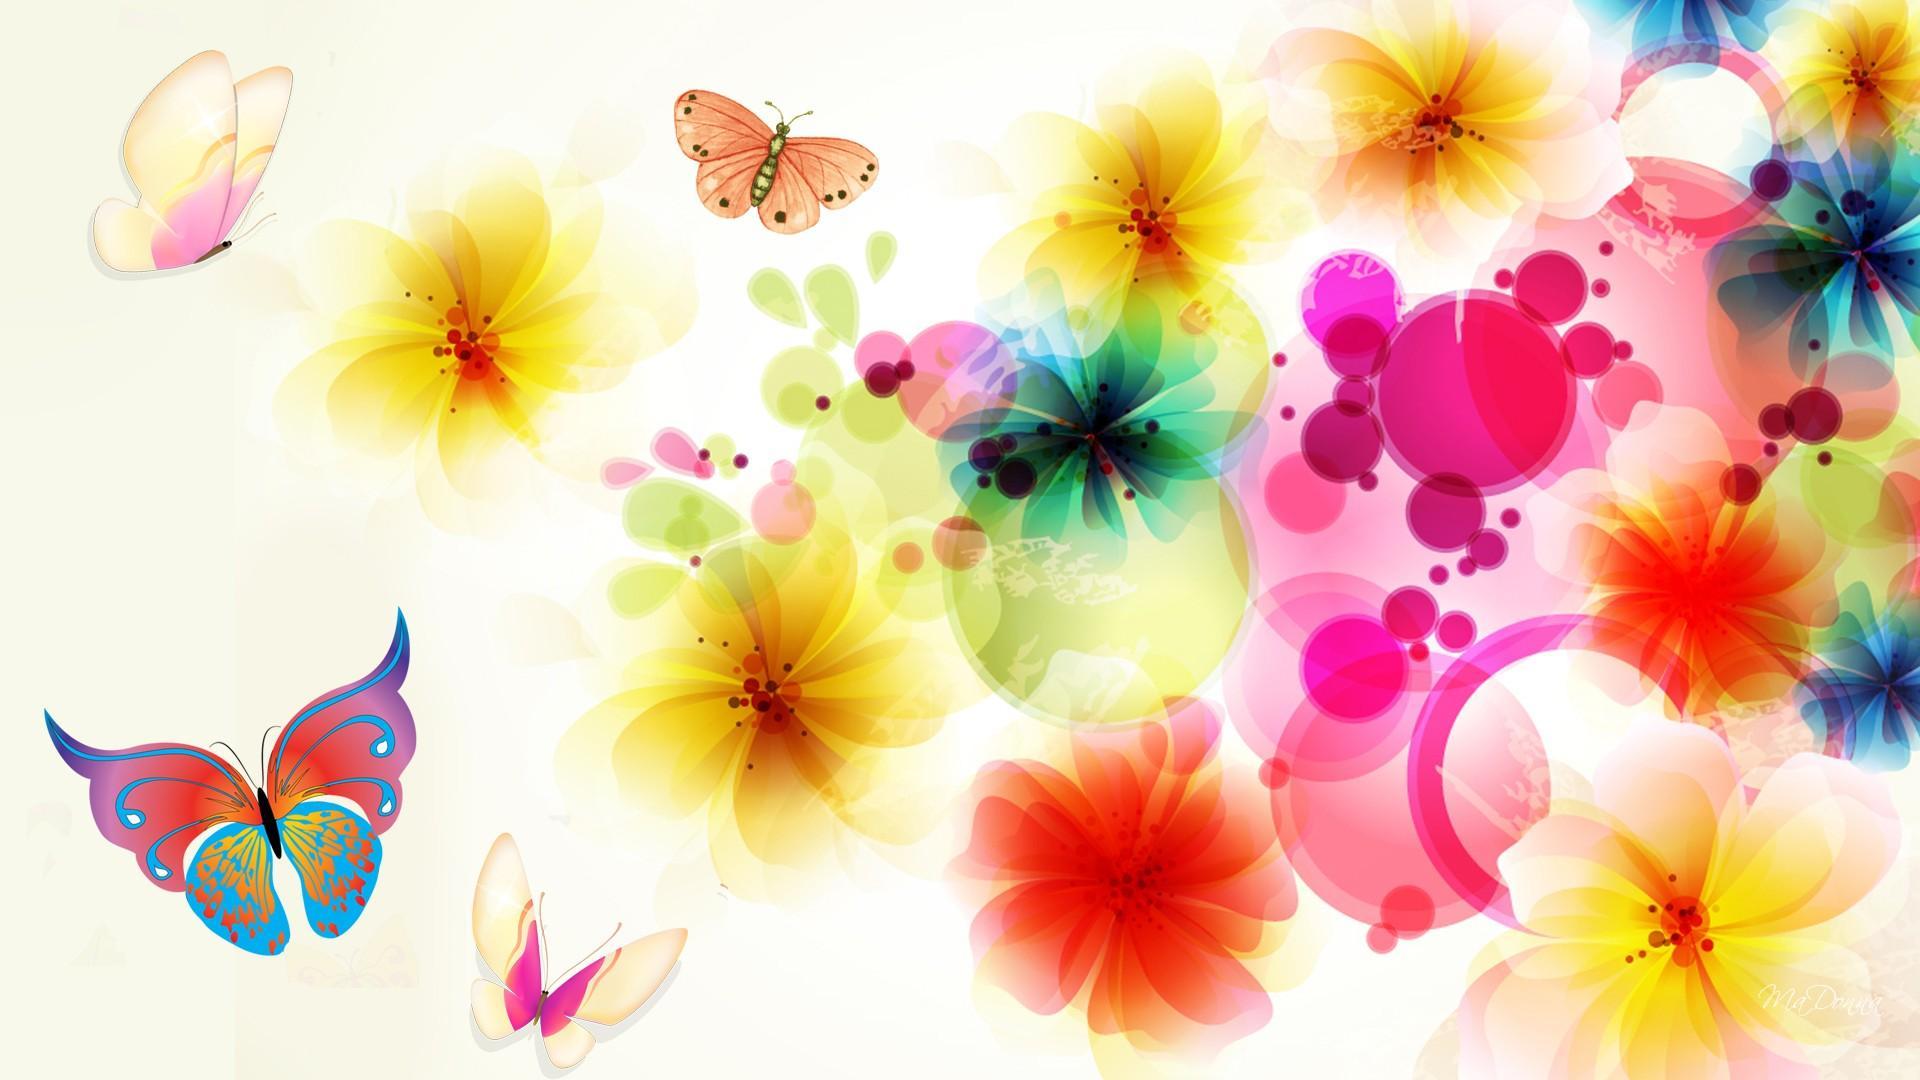 Exotic Floral Abstract - Floral Background Hd Free - 1920x1080 Wallpaper -  